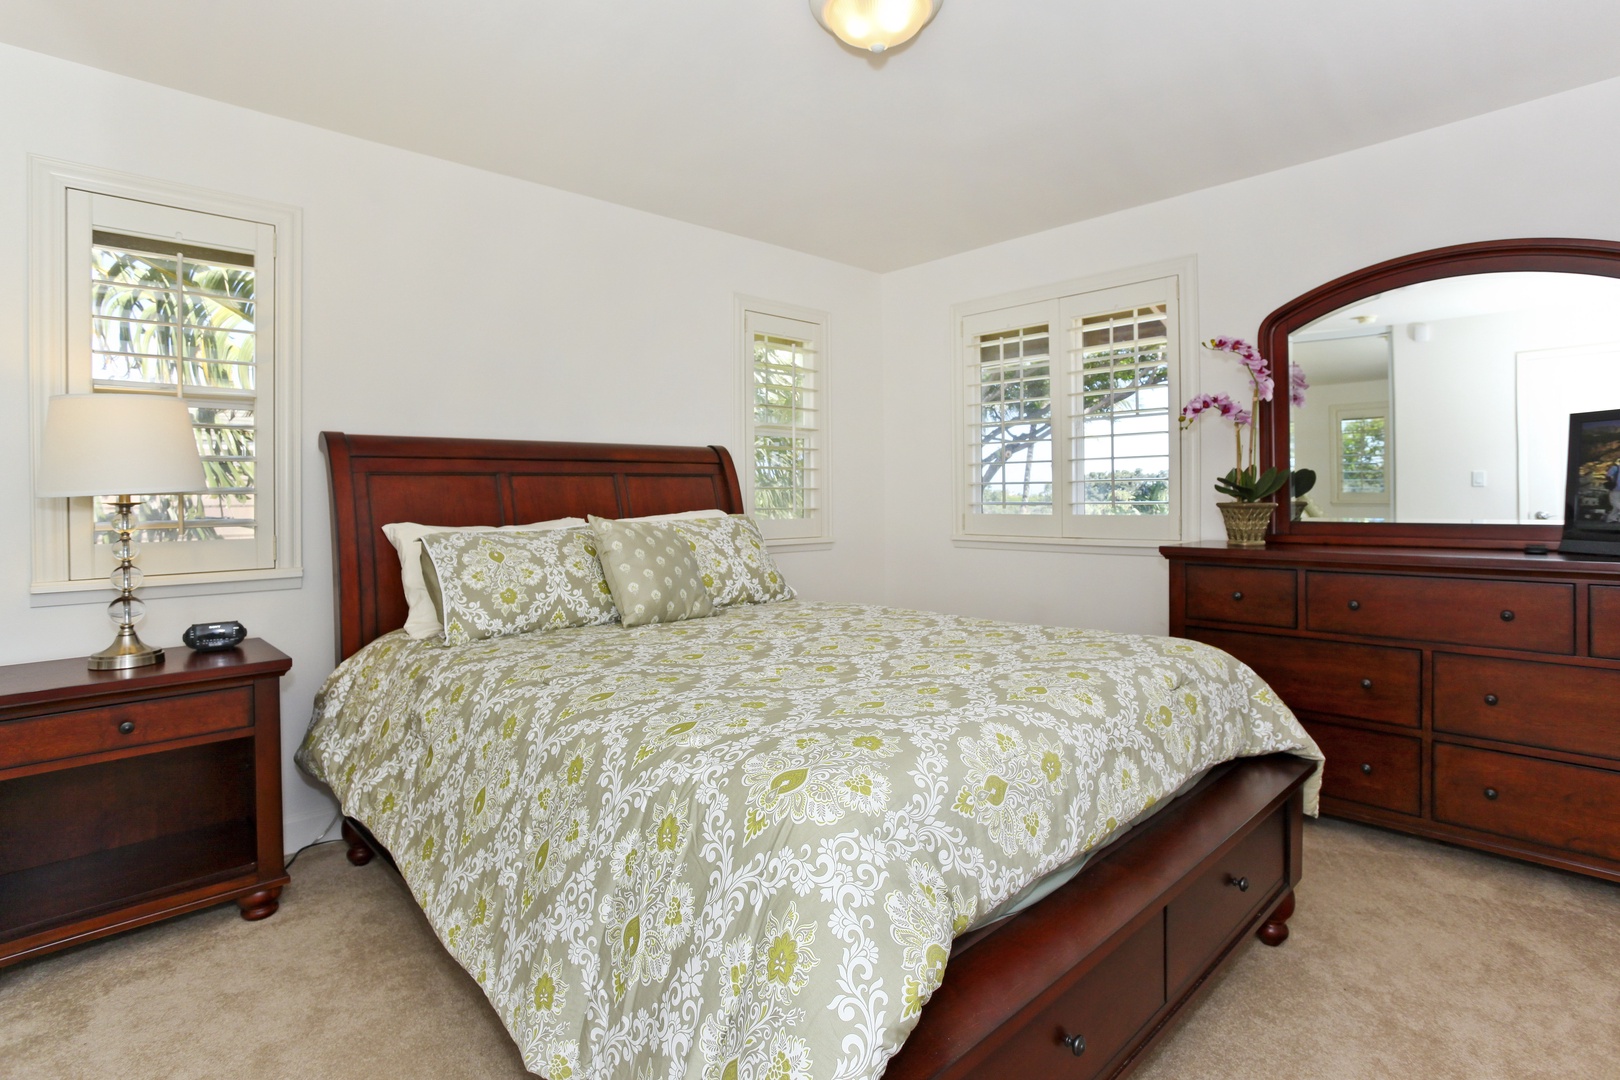 Kapolei Vacation Rentals, Ko Olina Kai Estate #20 - The third guest bedroom featuring soft linens and storage.